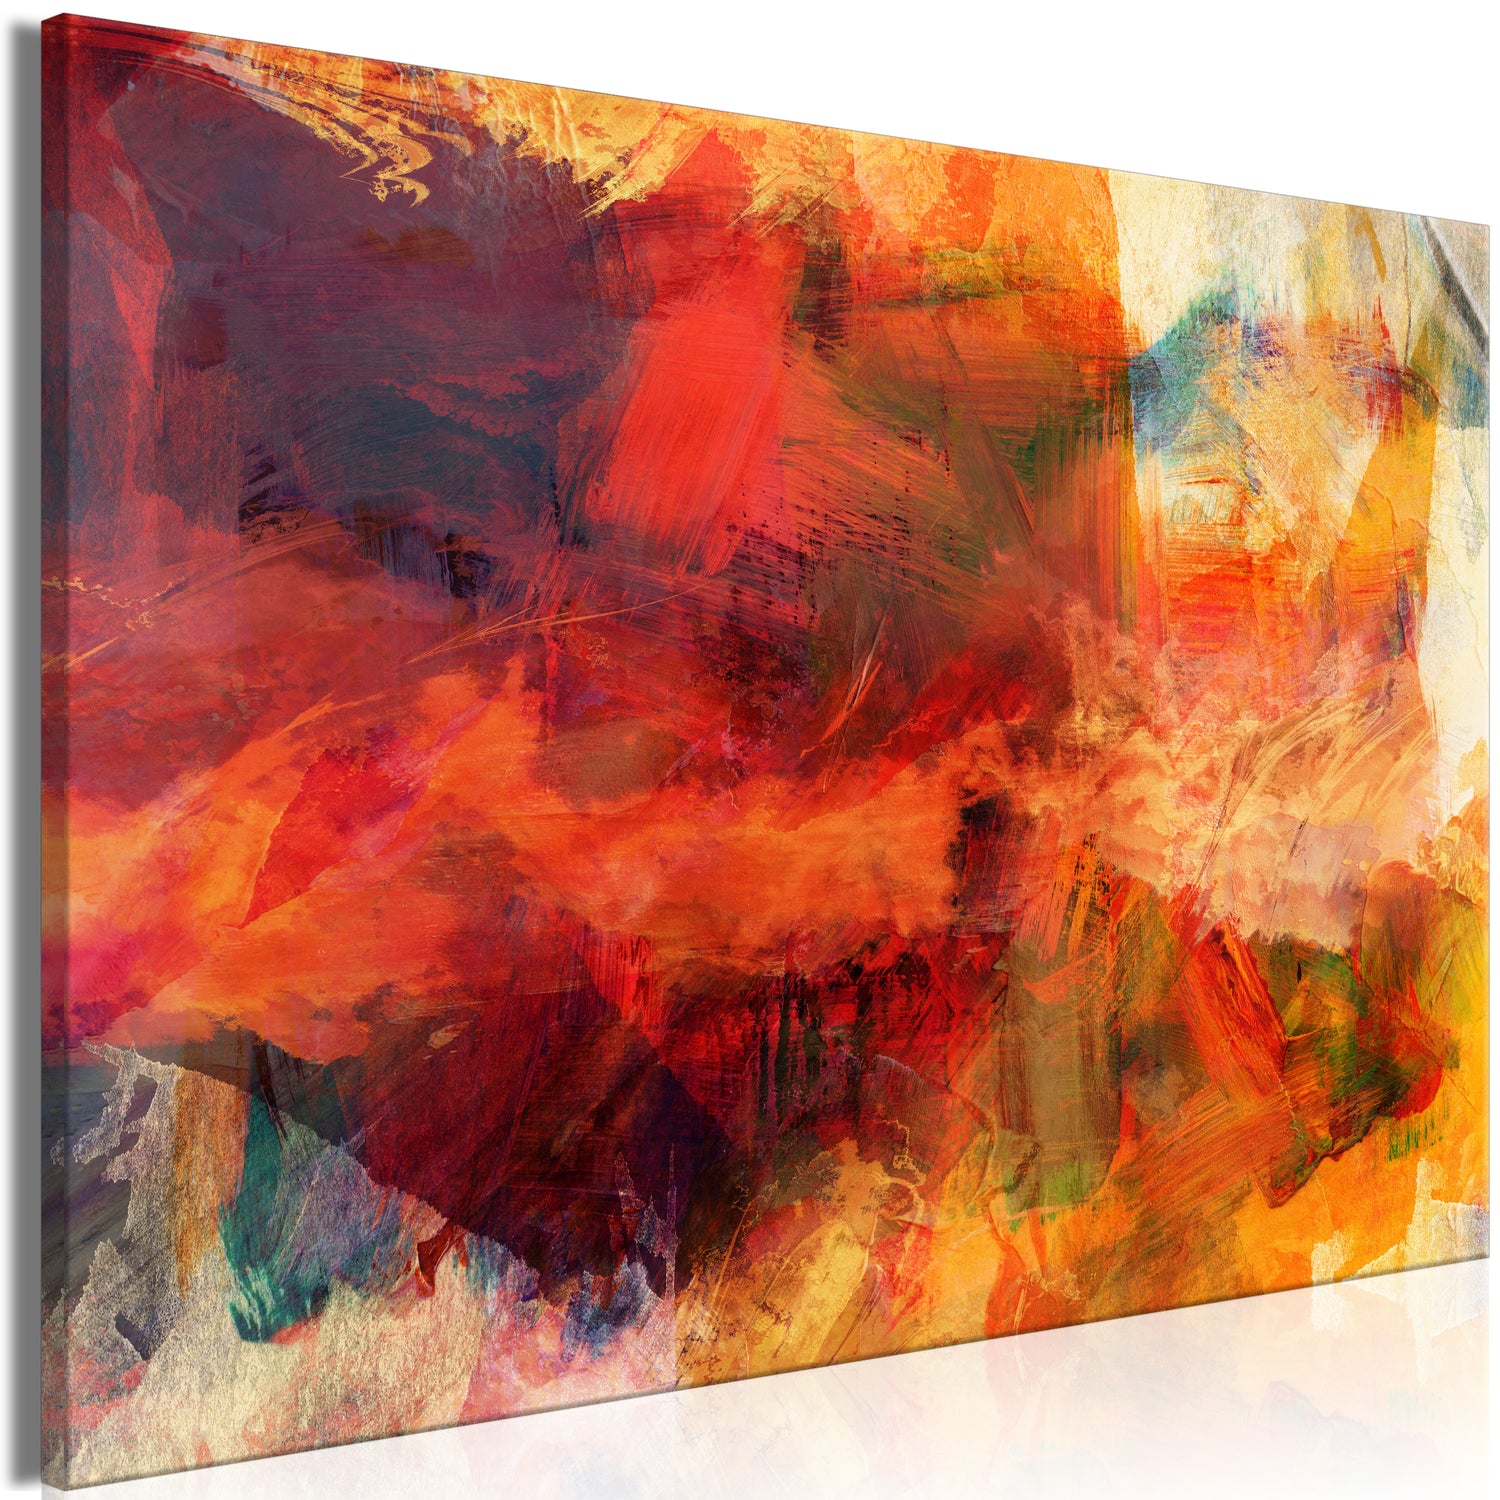 Abstract Canvas Wall Art - Explosion of Wild Colors